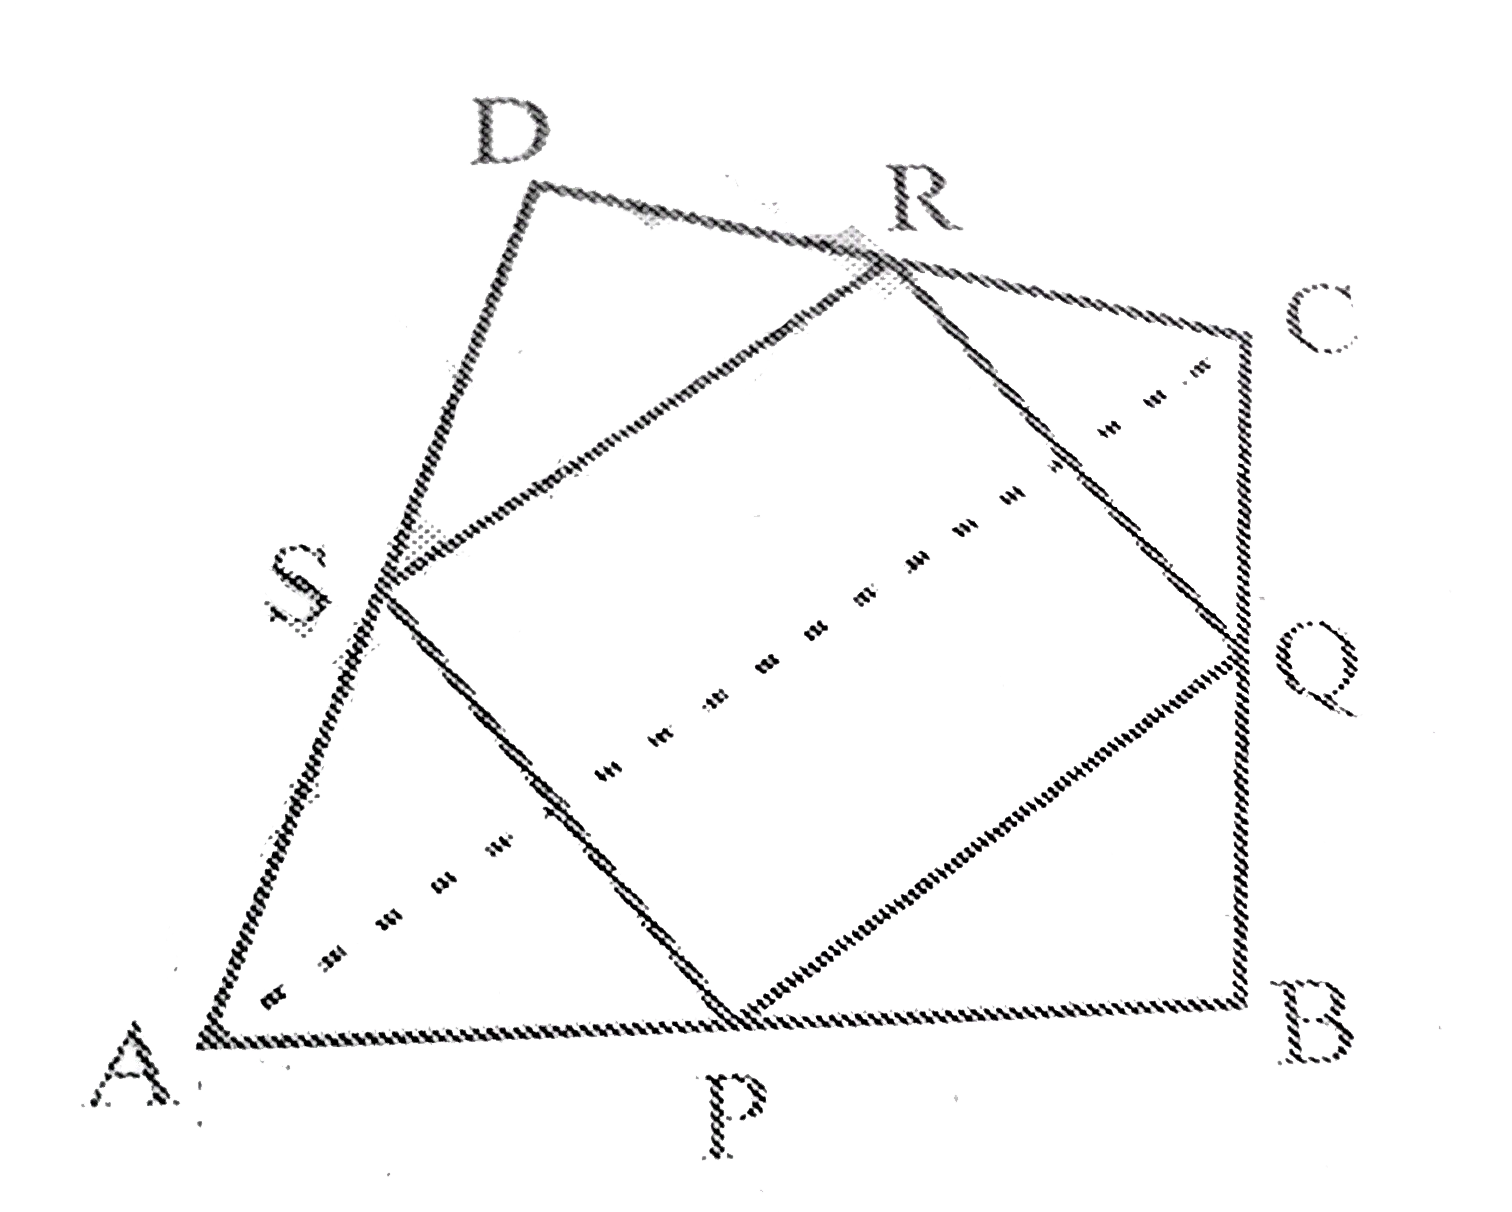 ABCD is a  quadrilateral in which P, Q, R and S are mid-points of the sides AB, BC, CD  and DA. AC is a diagonal. Show that : (i) S R\ ||\ A Cand S R=1/2A C (ii) P Q\ =\ S R (iii)  PQRS is a parallelogram.